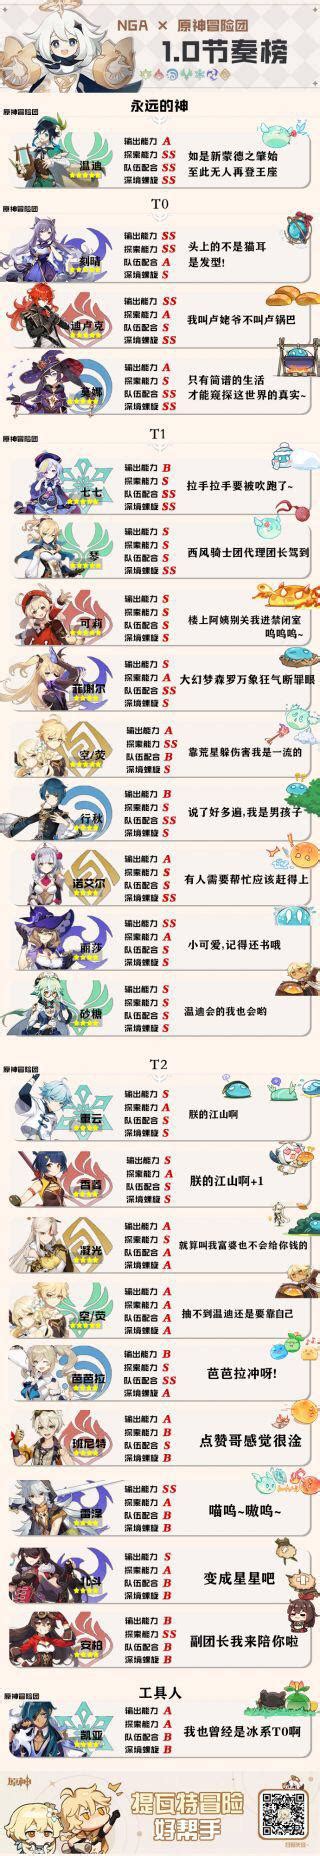 For every character in the party who hails from liyue, the character who equips this weapon gains a 7% atk increase and a 3% crit rate increase. Another Chinese OBT tier list : Genshin_Impact